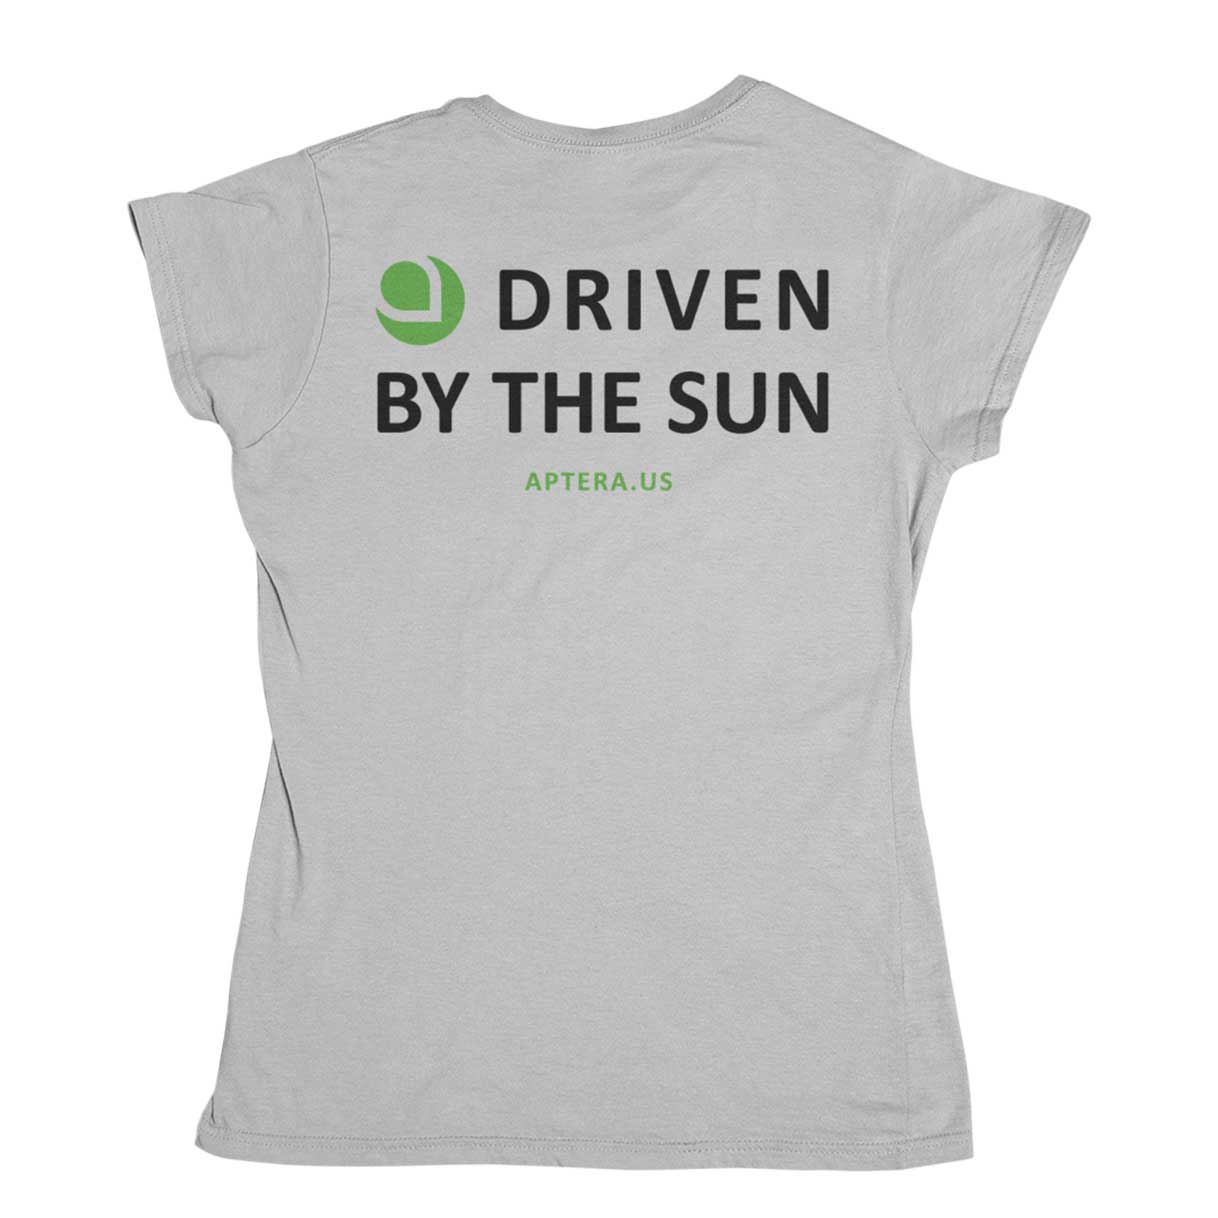 Women's Driven by the Sun Tee